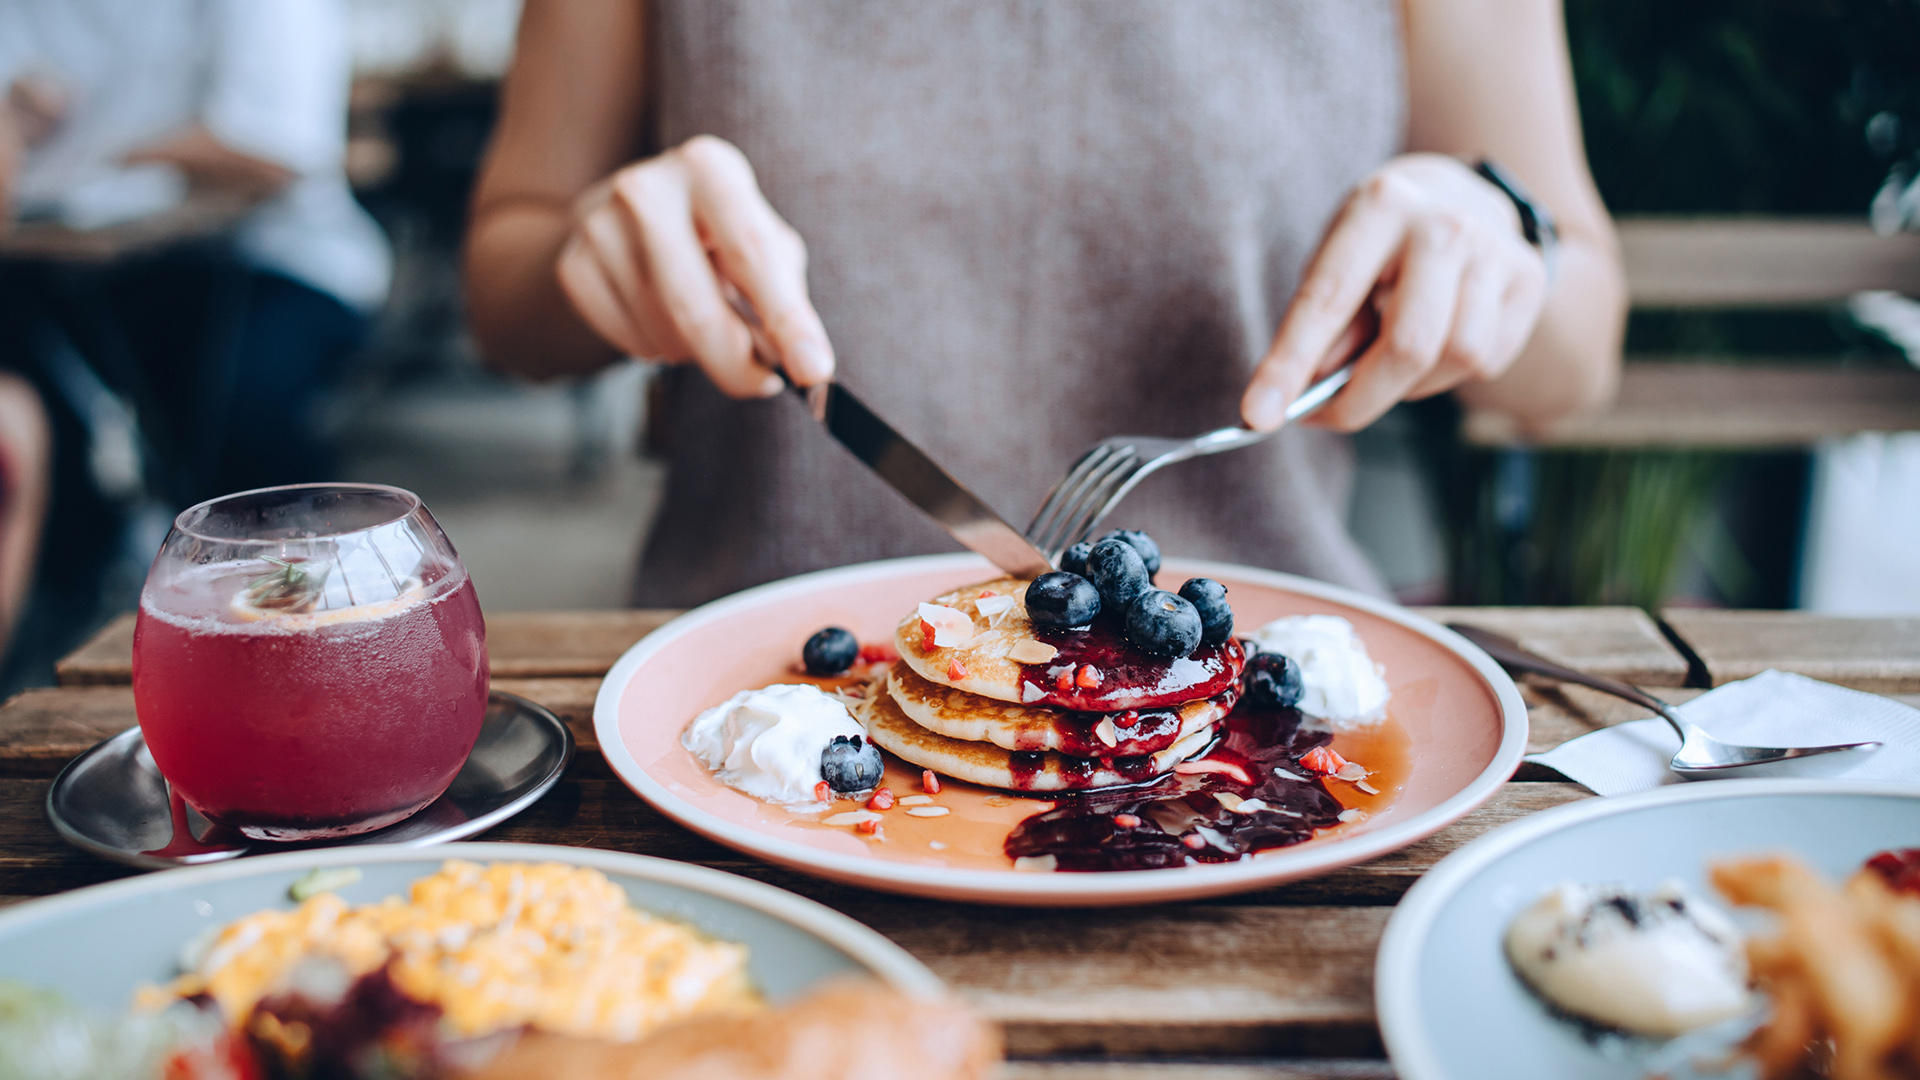 Close up of young woman sitting at dining table eating pancakes with blueberries and whipped cream in cafe, with English breakfast and french fries served on the dining table. Eating out lifestyle